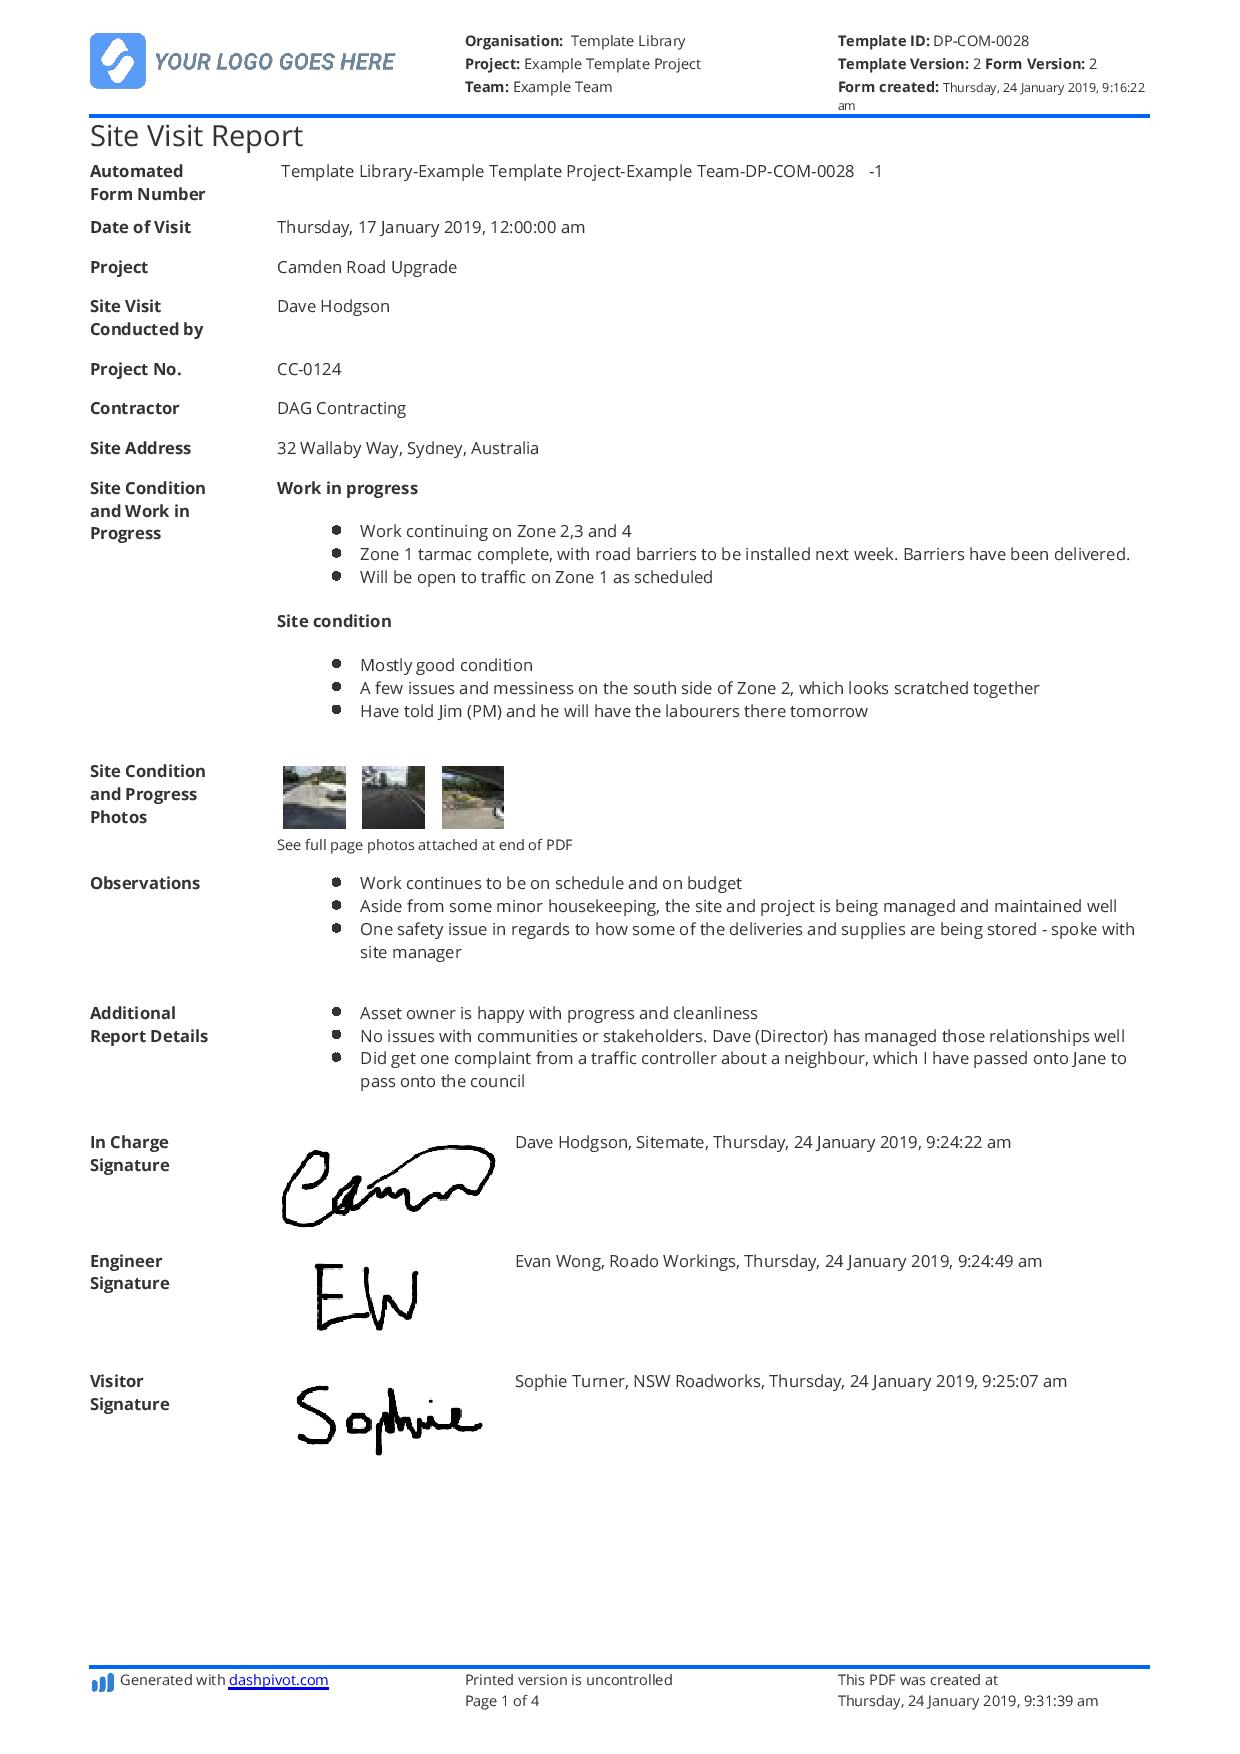 Construction Site Visit Report template and sample [Free to use] With Site Visit Report Template Free Download